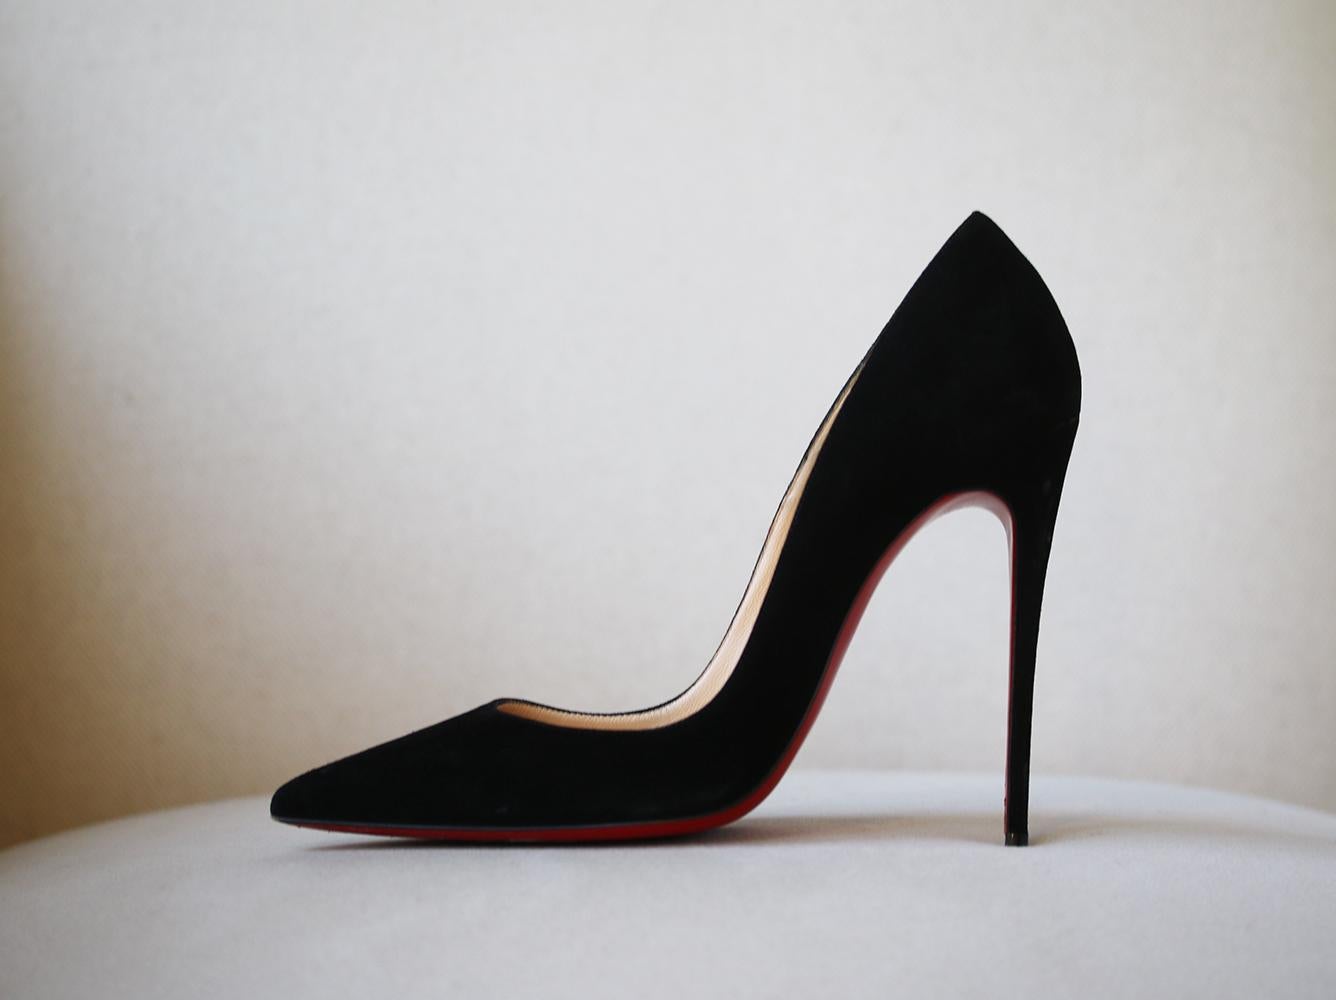 Christian Louboutin's iconic 'So Kate' pumps are defined by their pointed toe and thin stiletto heel. This Italian-made pair is crafted from black suede cut with a leg-lengthening low vamp and finished with the label's signature lacquered red soles.